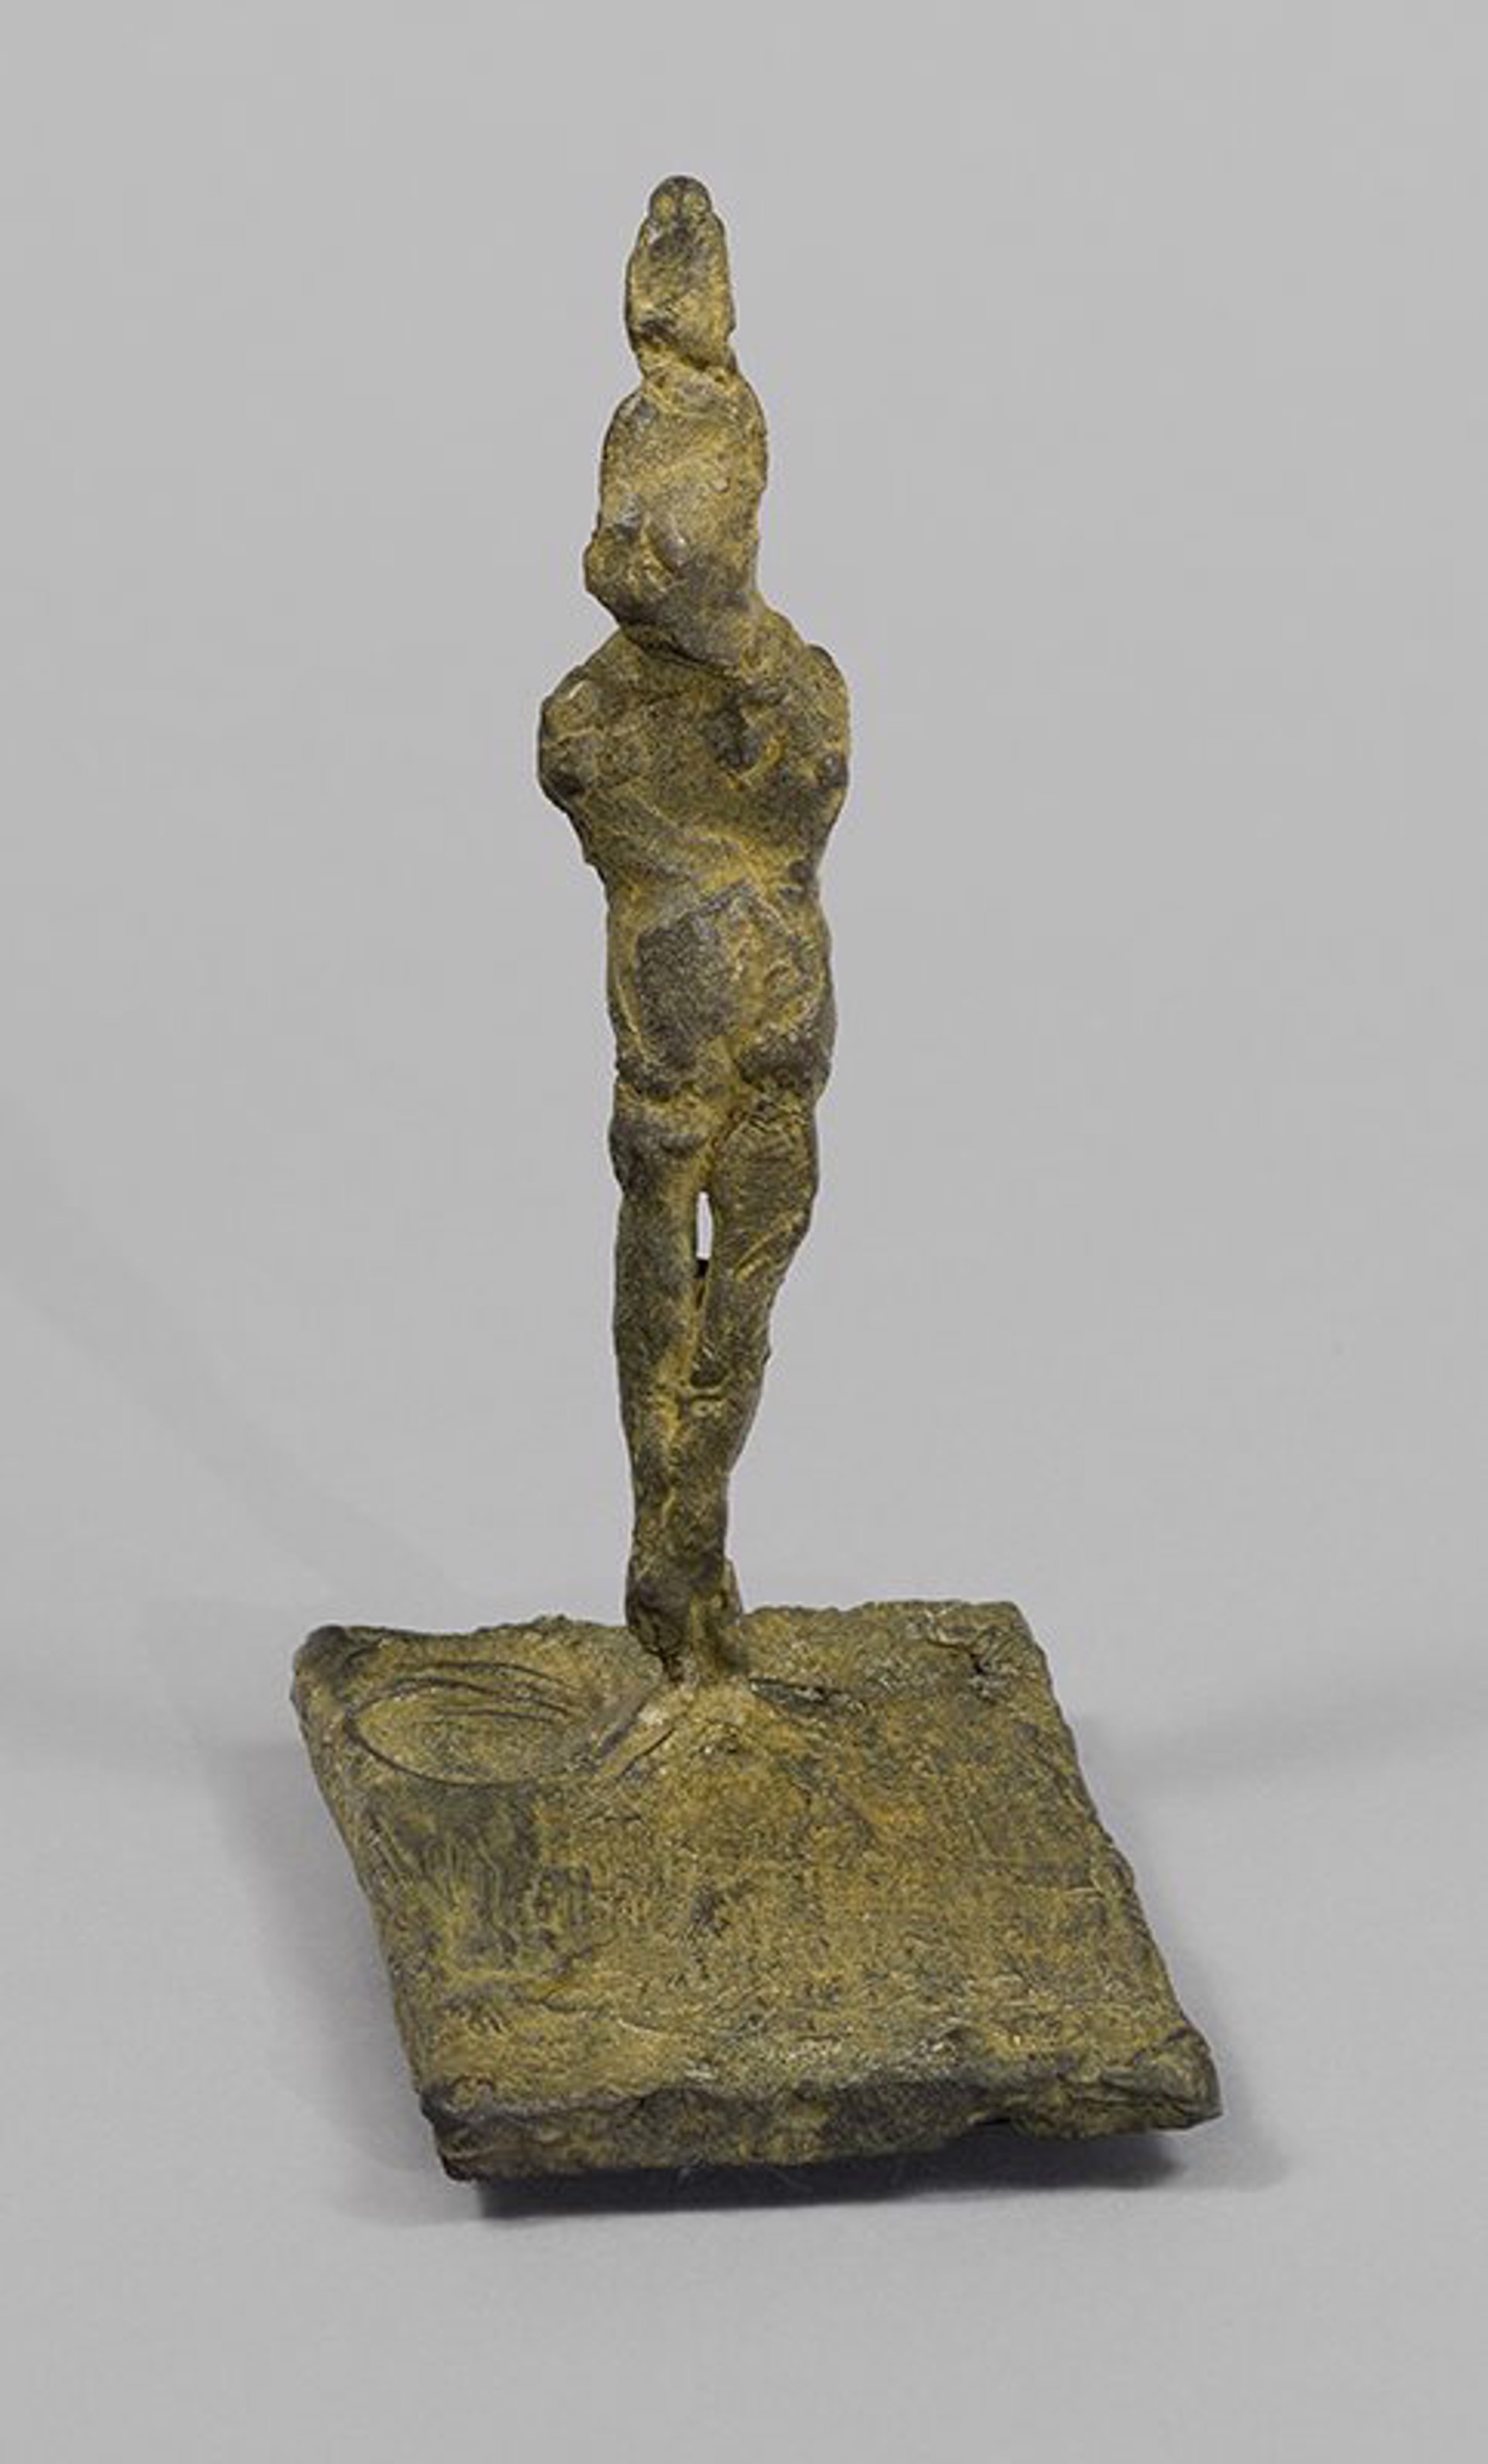 Small Figure (Ed. 22/25, Maquette) by Nathan Oliveira